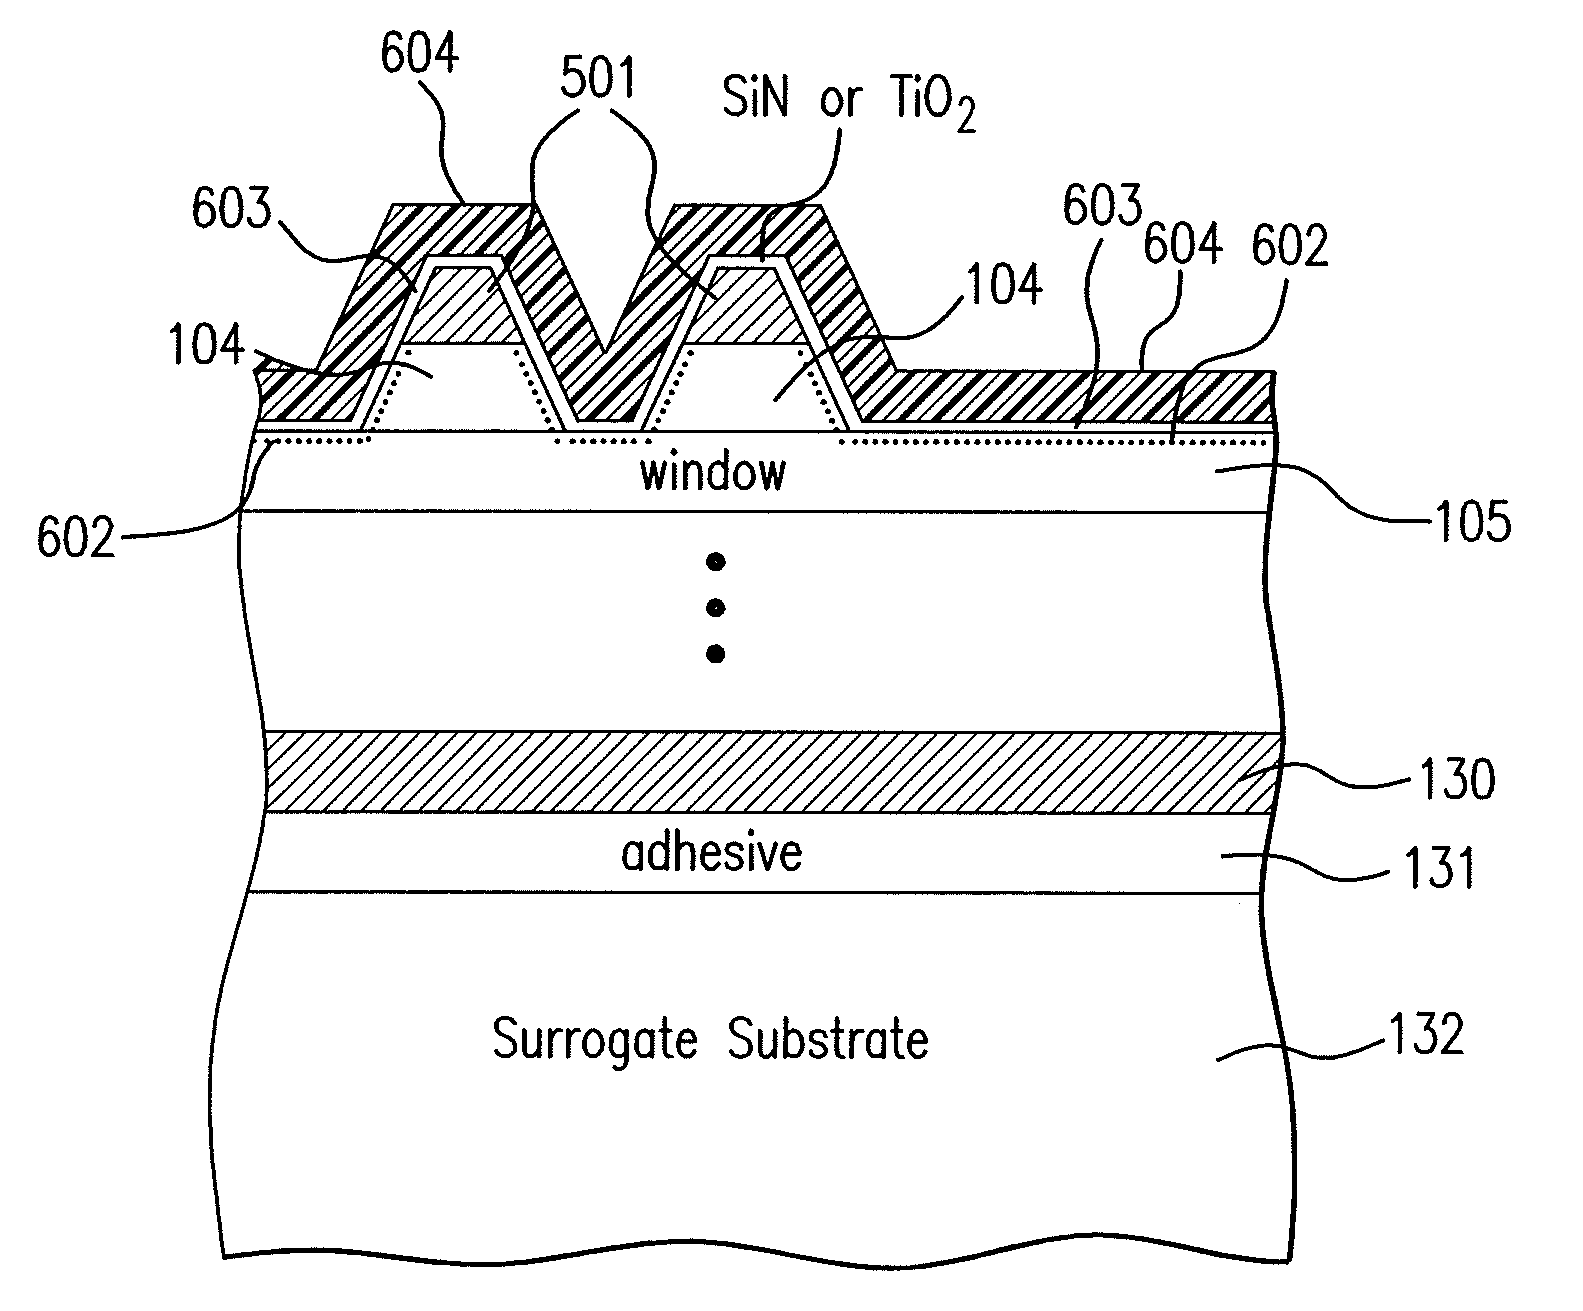 Inverted metamorphic multijunction solar cell with passivation in the window layer